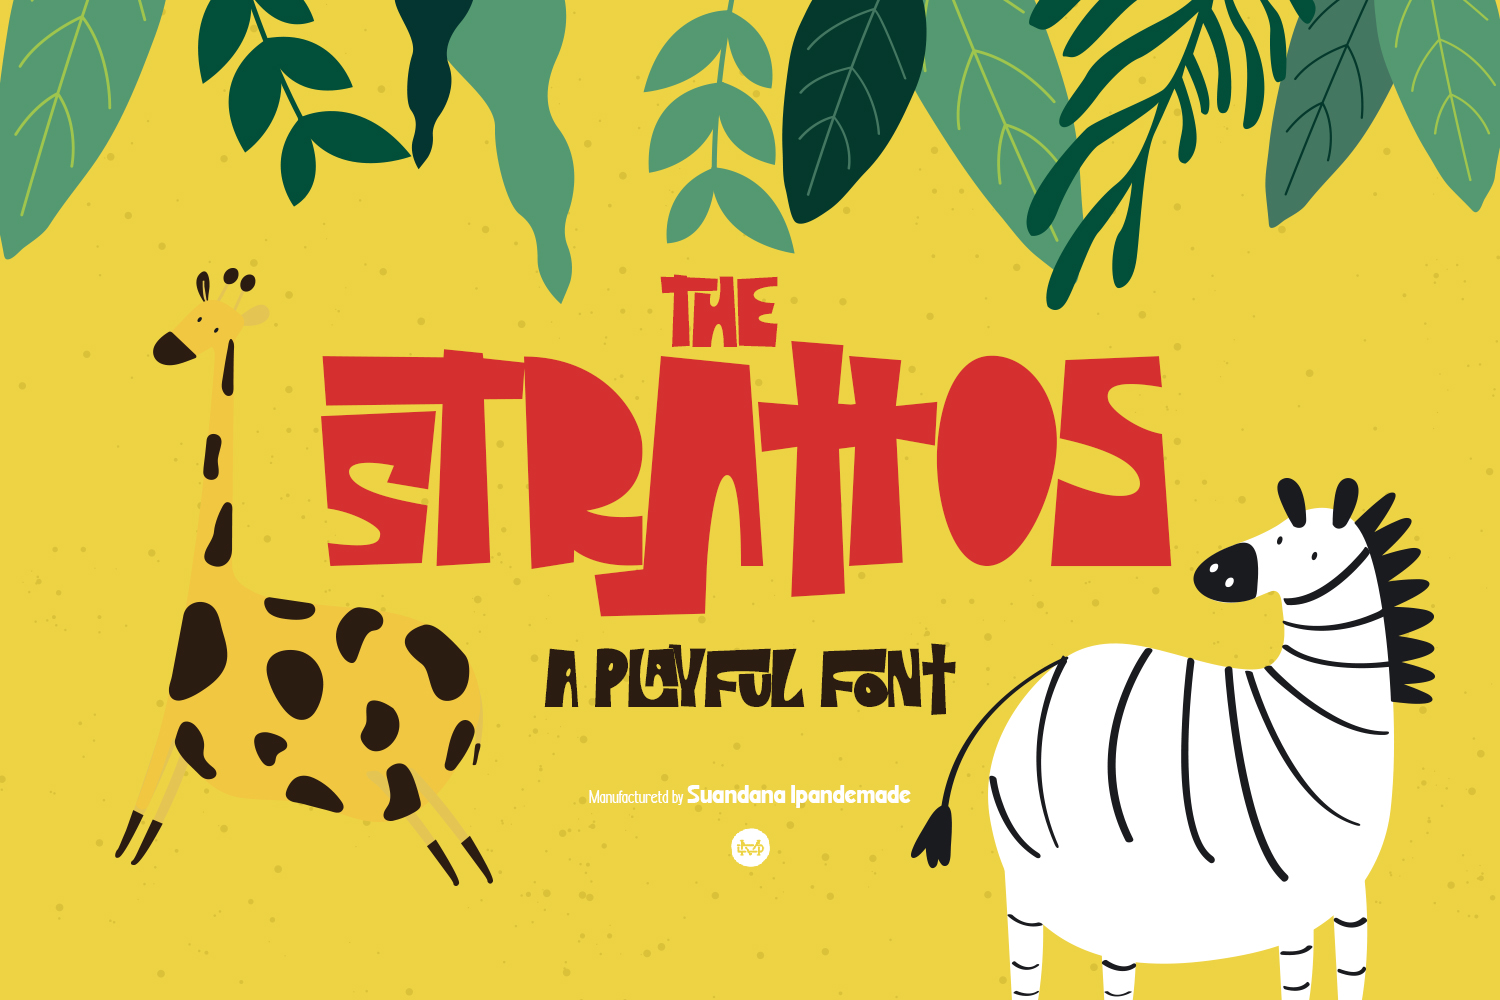 The Strattos Display Font